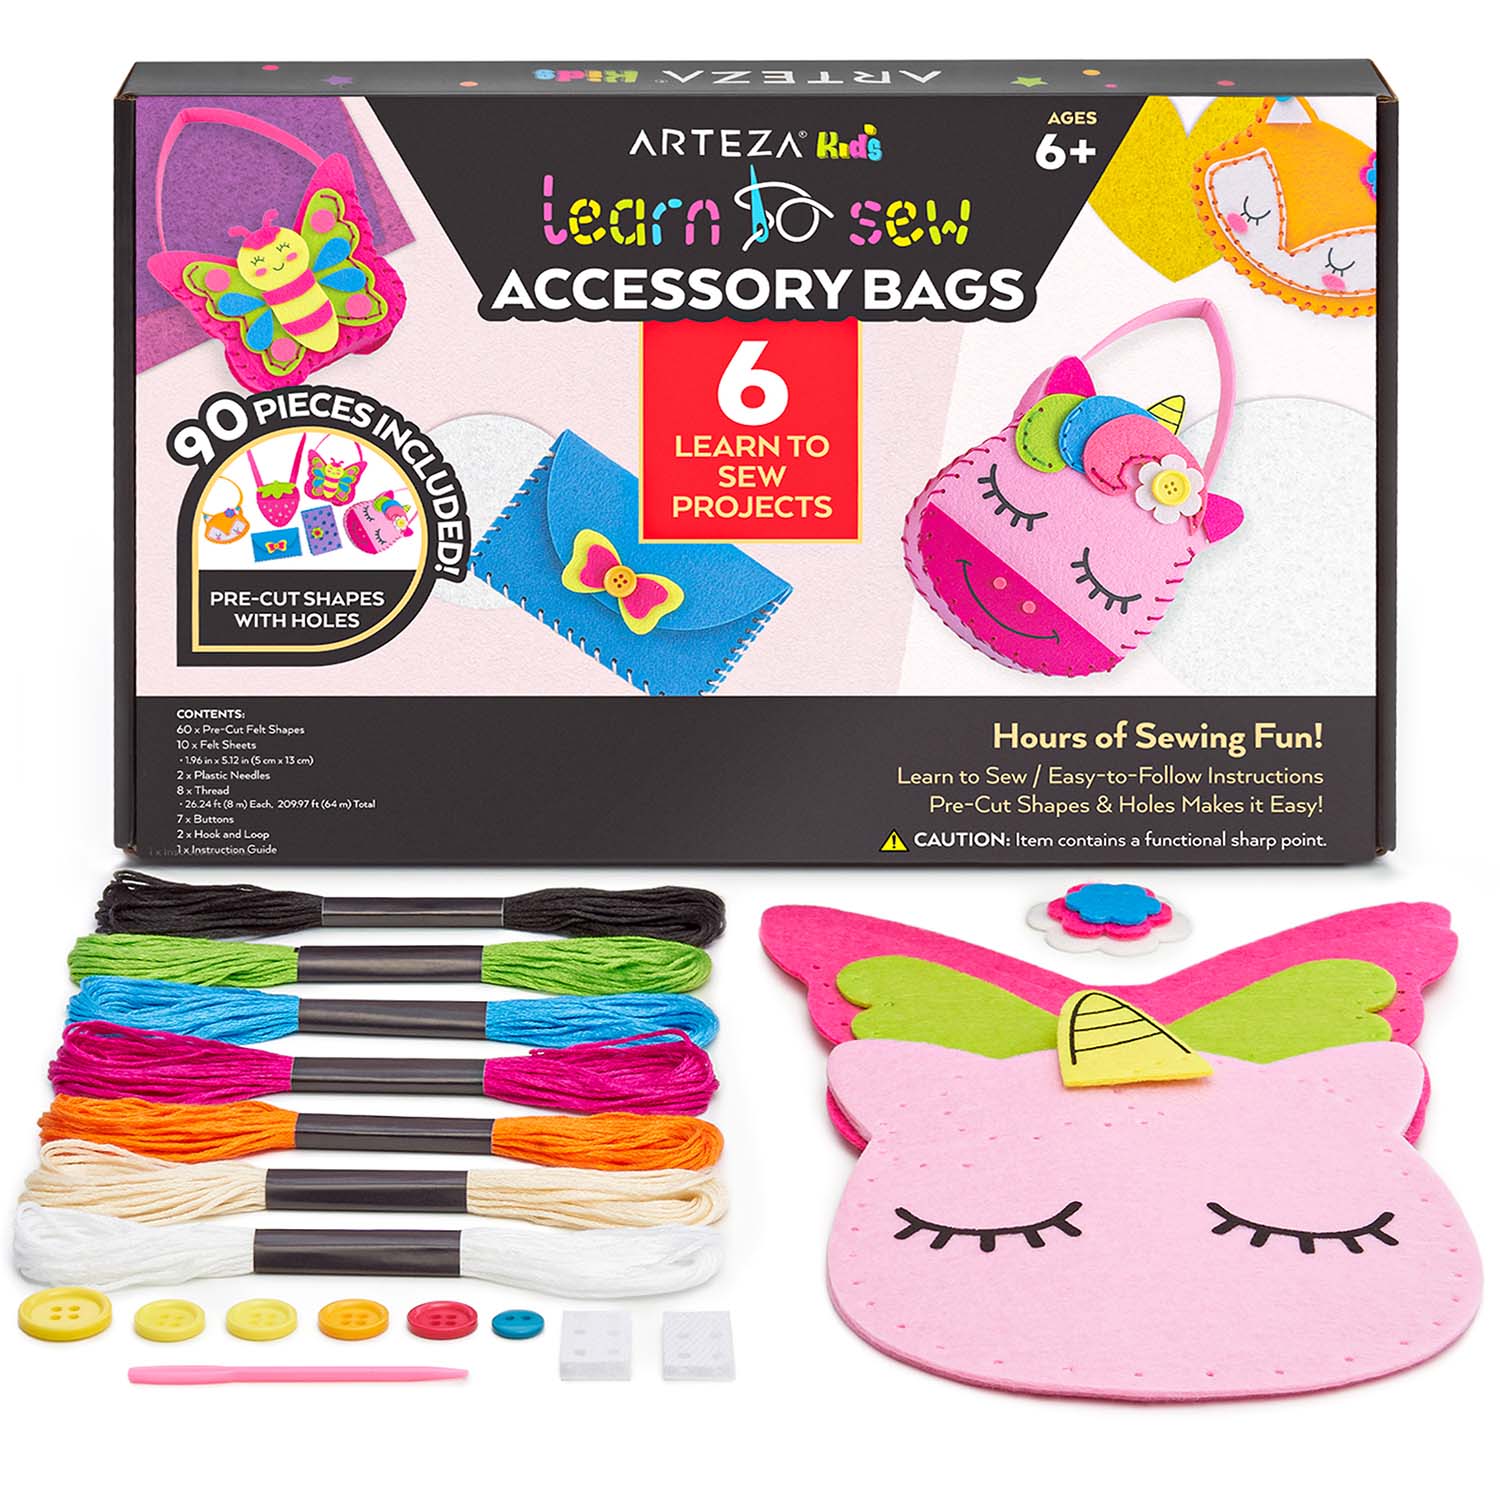  Rtudan First Sewing Kit for Kids, Include 6 Cross-Body Sewing  Bags, 1 Craft Scissors, 1 Beautiful Gift Bag, Learn to Sew Educational  Toys, Kids Sewing Crafts Supplies, Girls Craft Gifts DIY